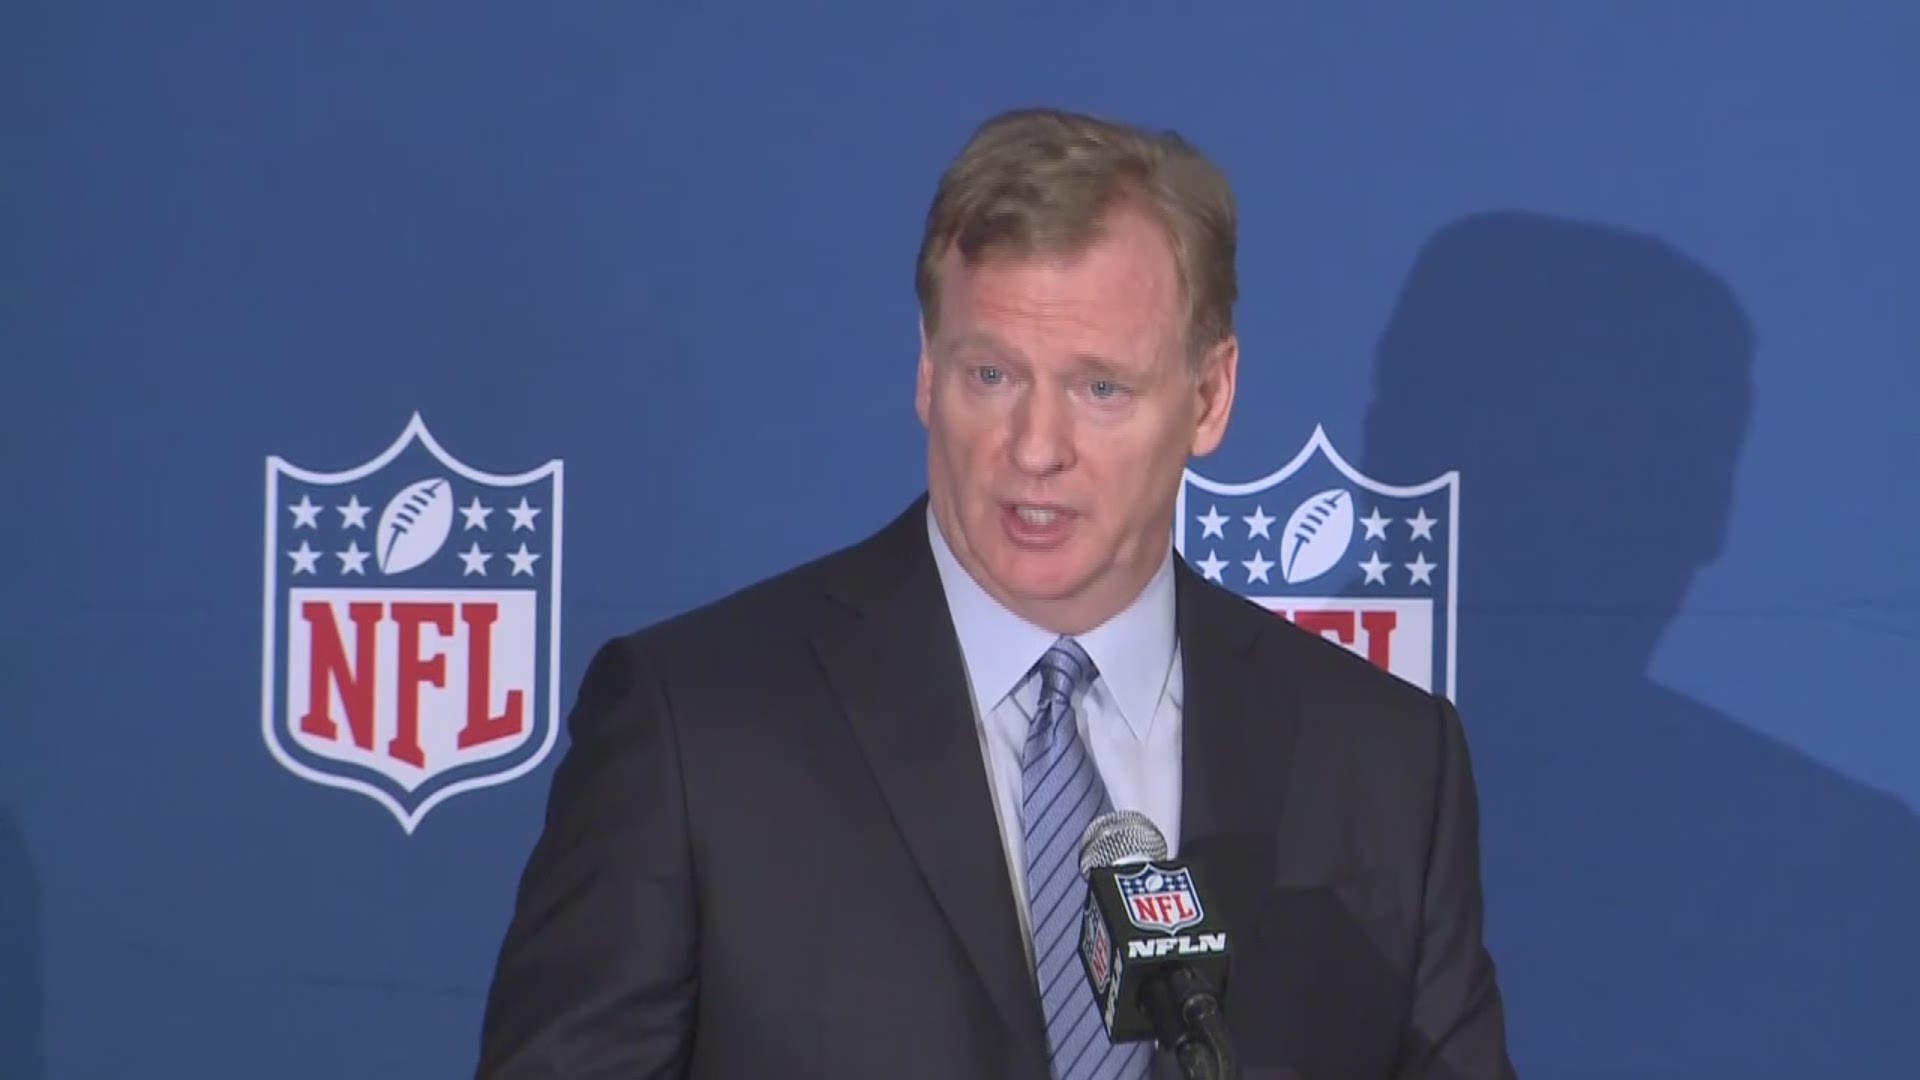 NFL Commissioner Roger Goodell and the league owners handed down their edict on Wednesday - stand for the anthem, or stay in the locker room.